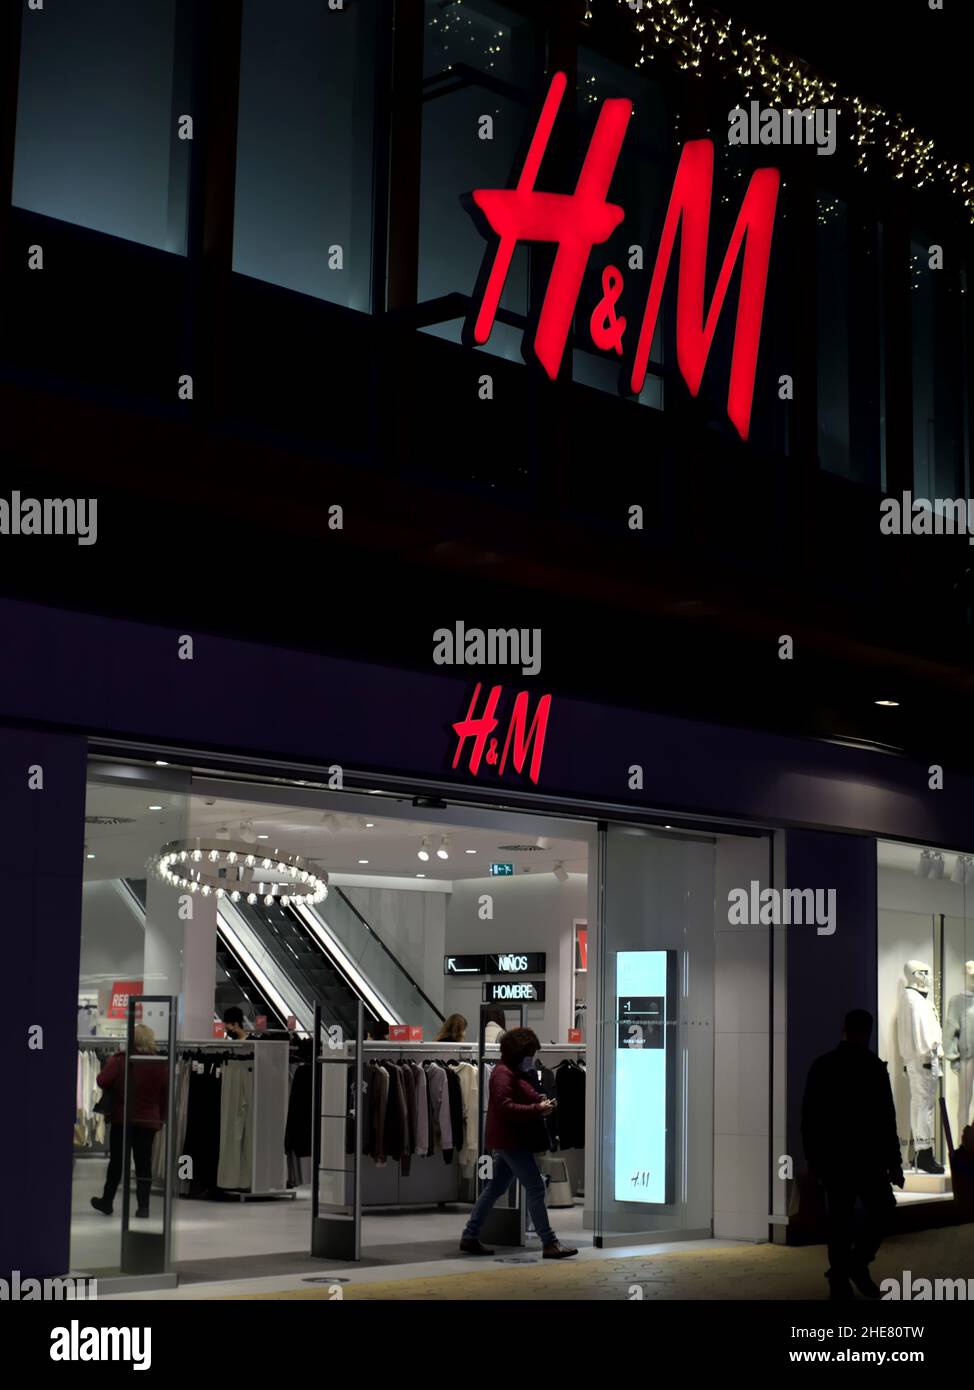 Page 2 - H&m shop High Resolution Stock Photography and Images - Alamy